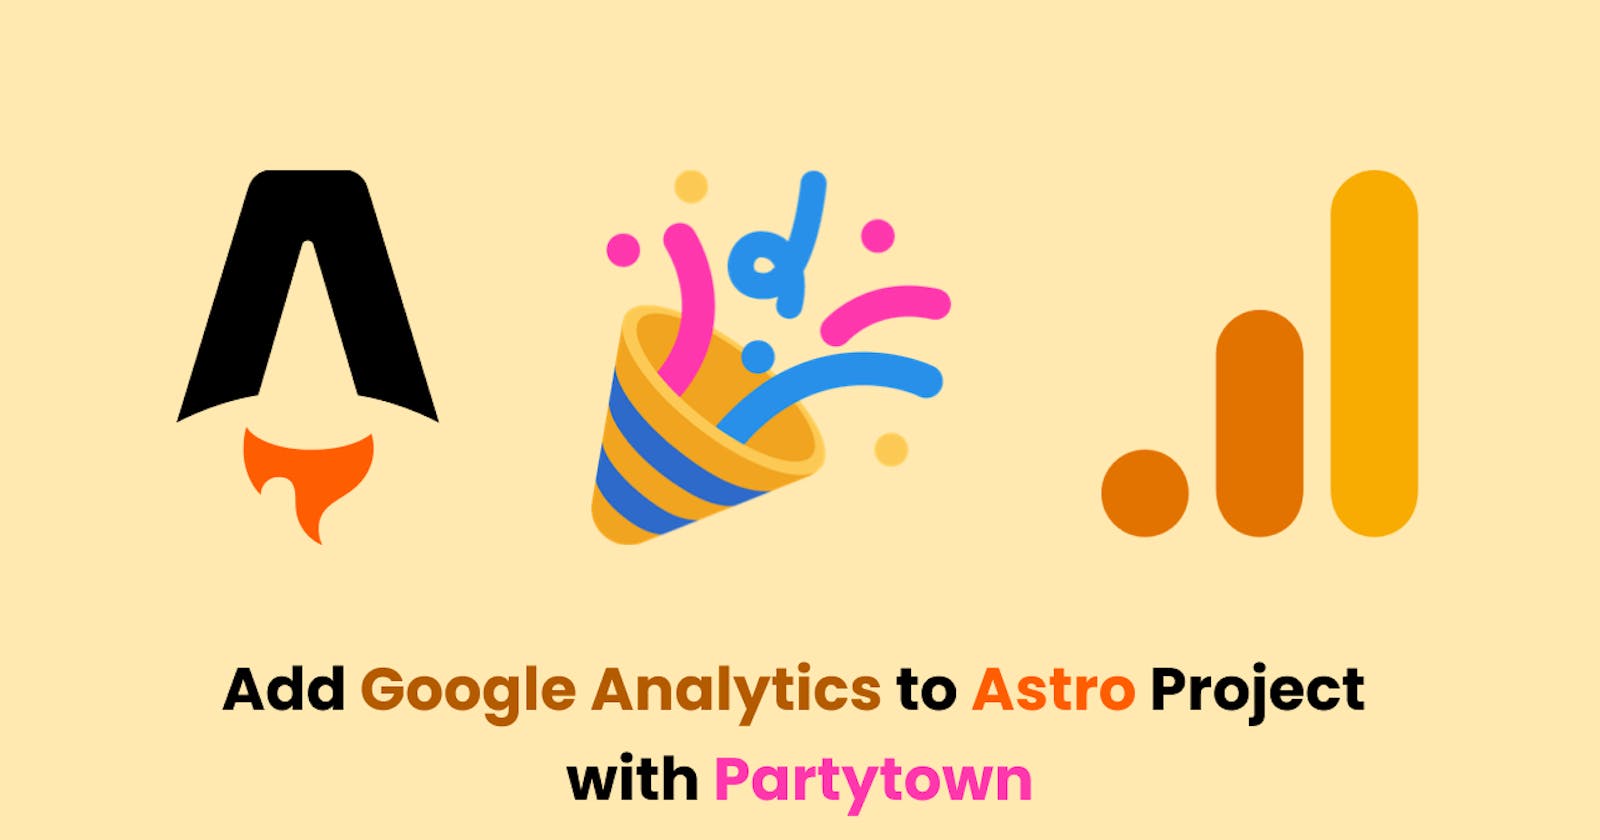 Add Google Analytics to Astro Project with Partytown